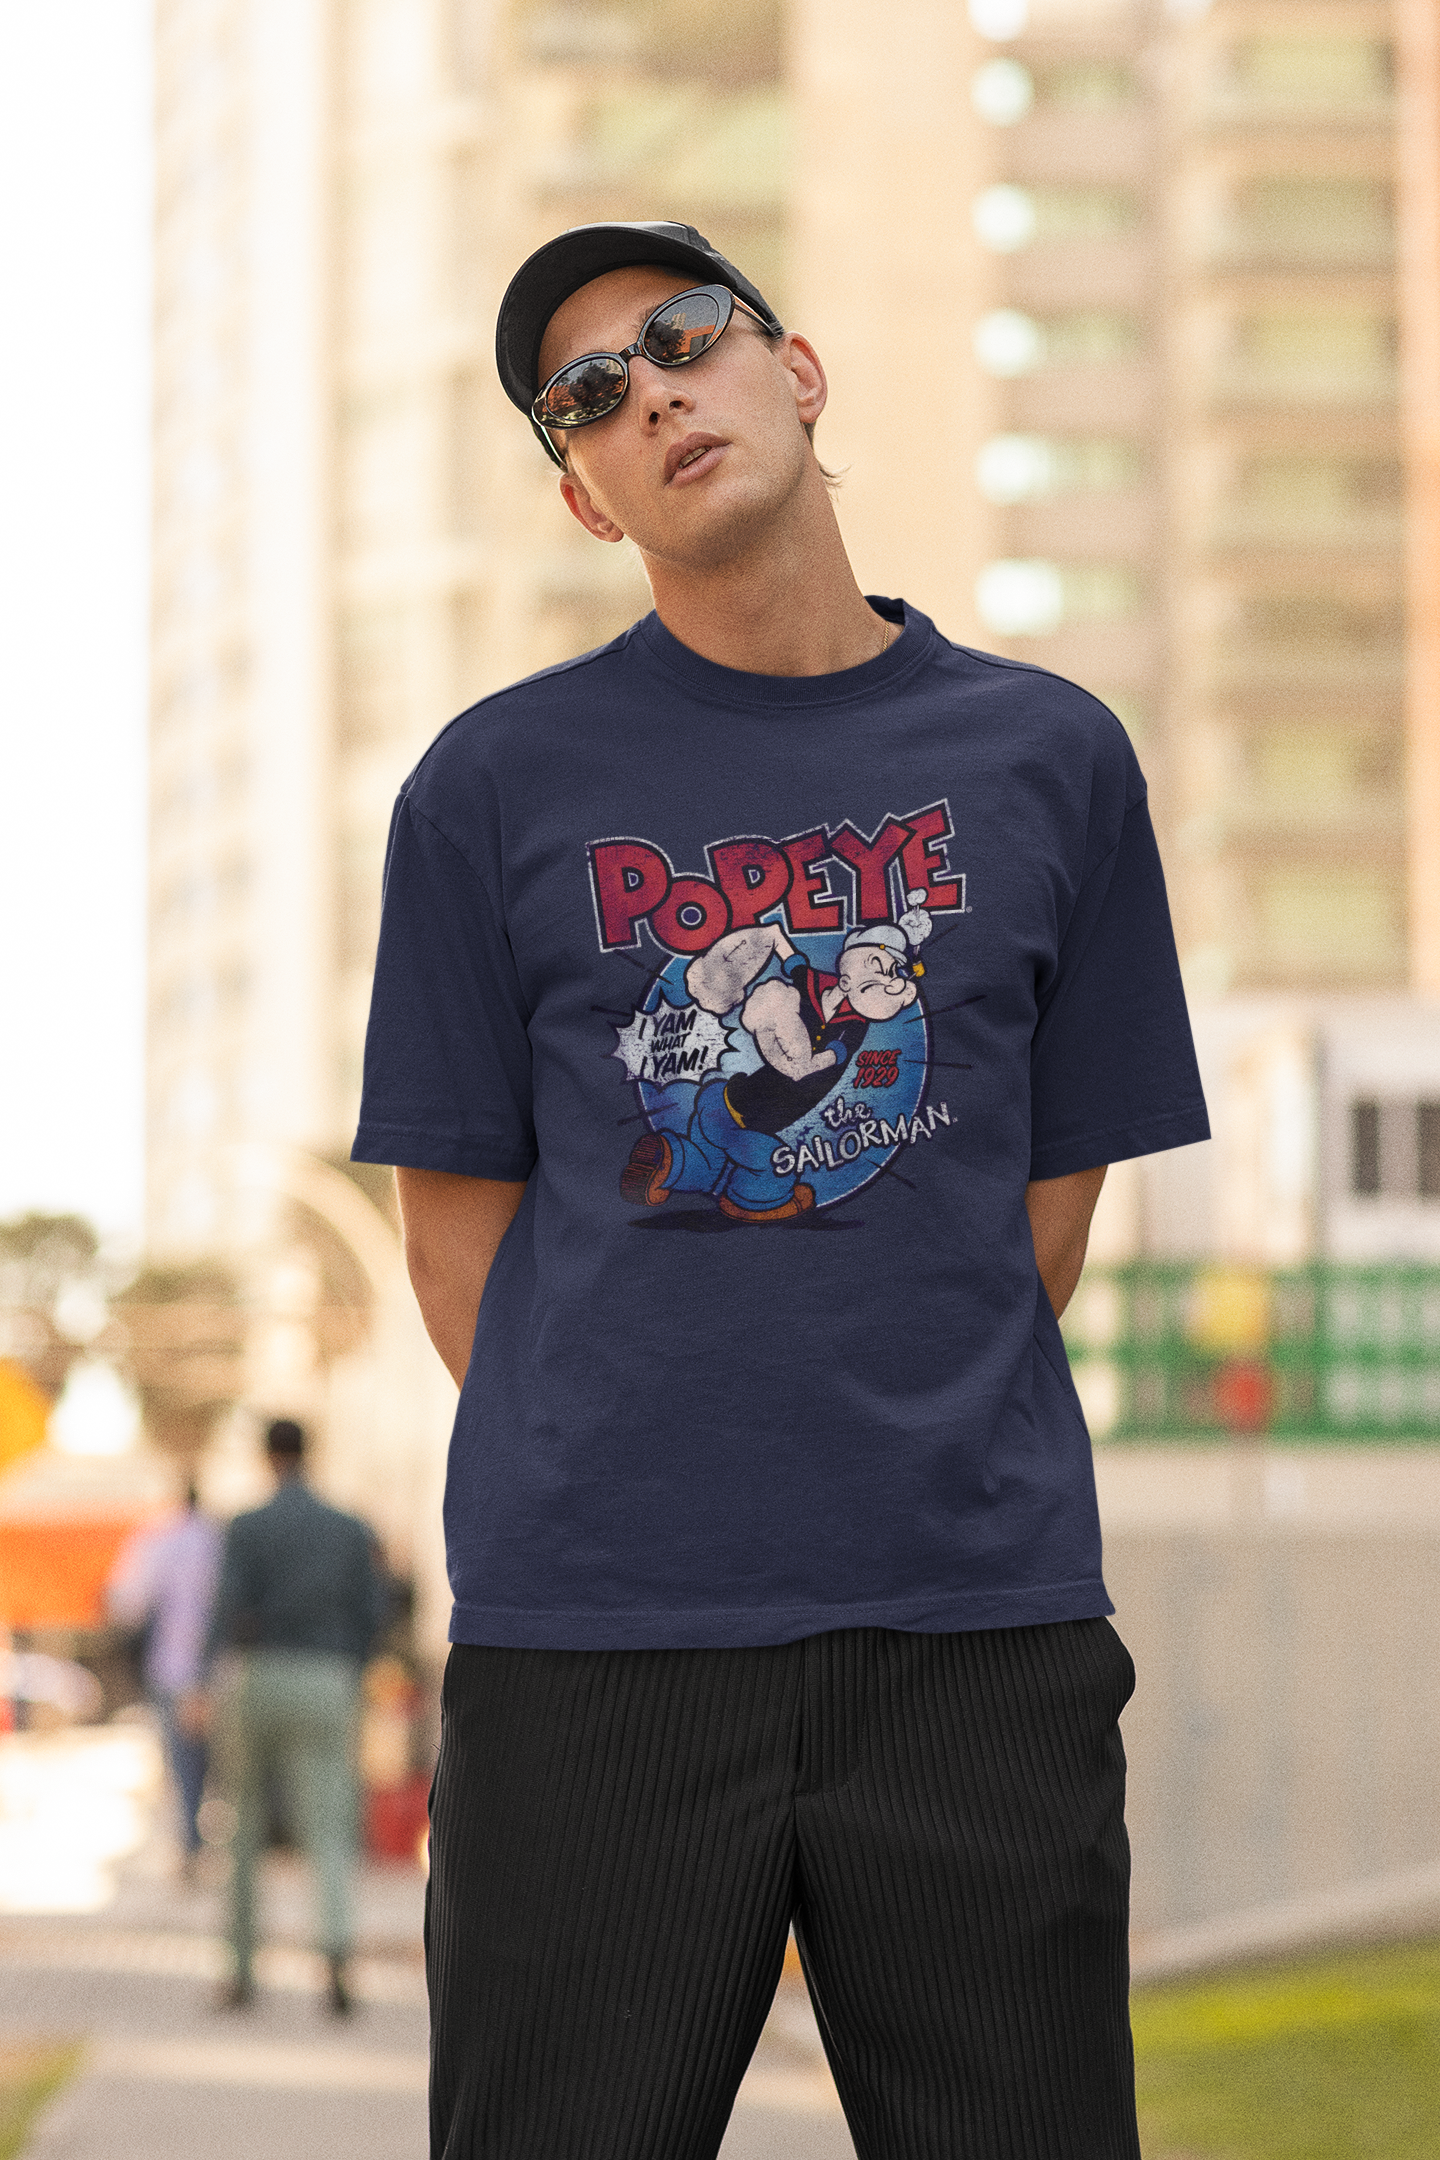 Y&D: "Popeye the Sailor" themed Unisex Oversized tee